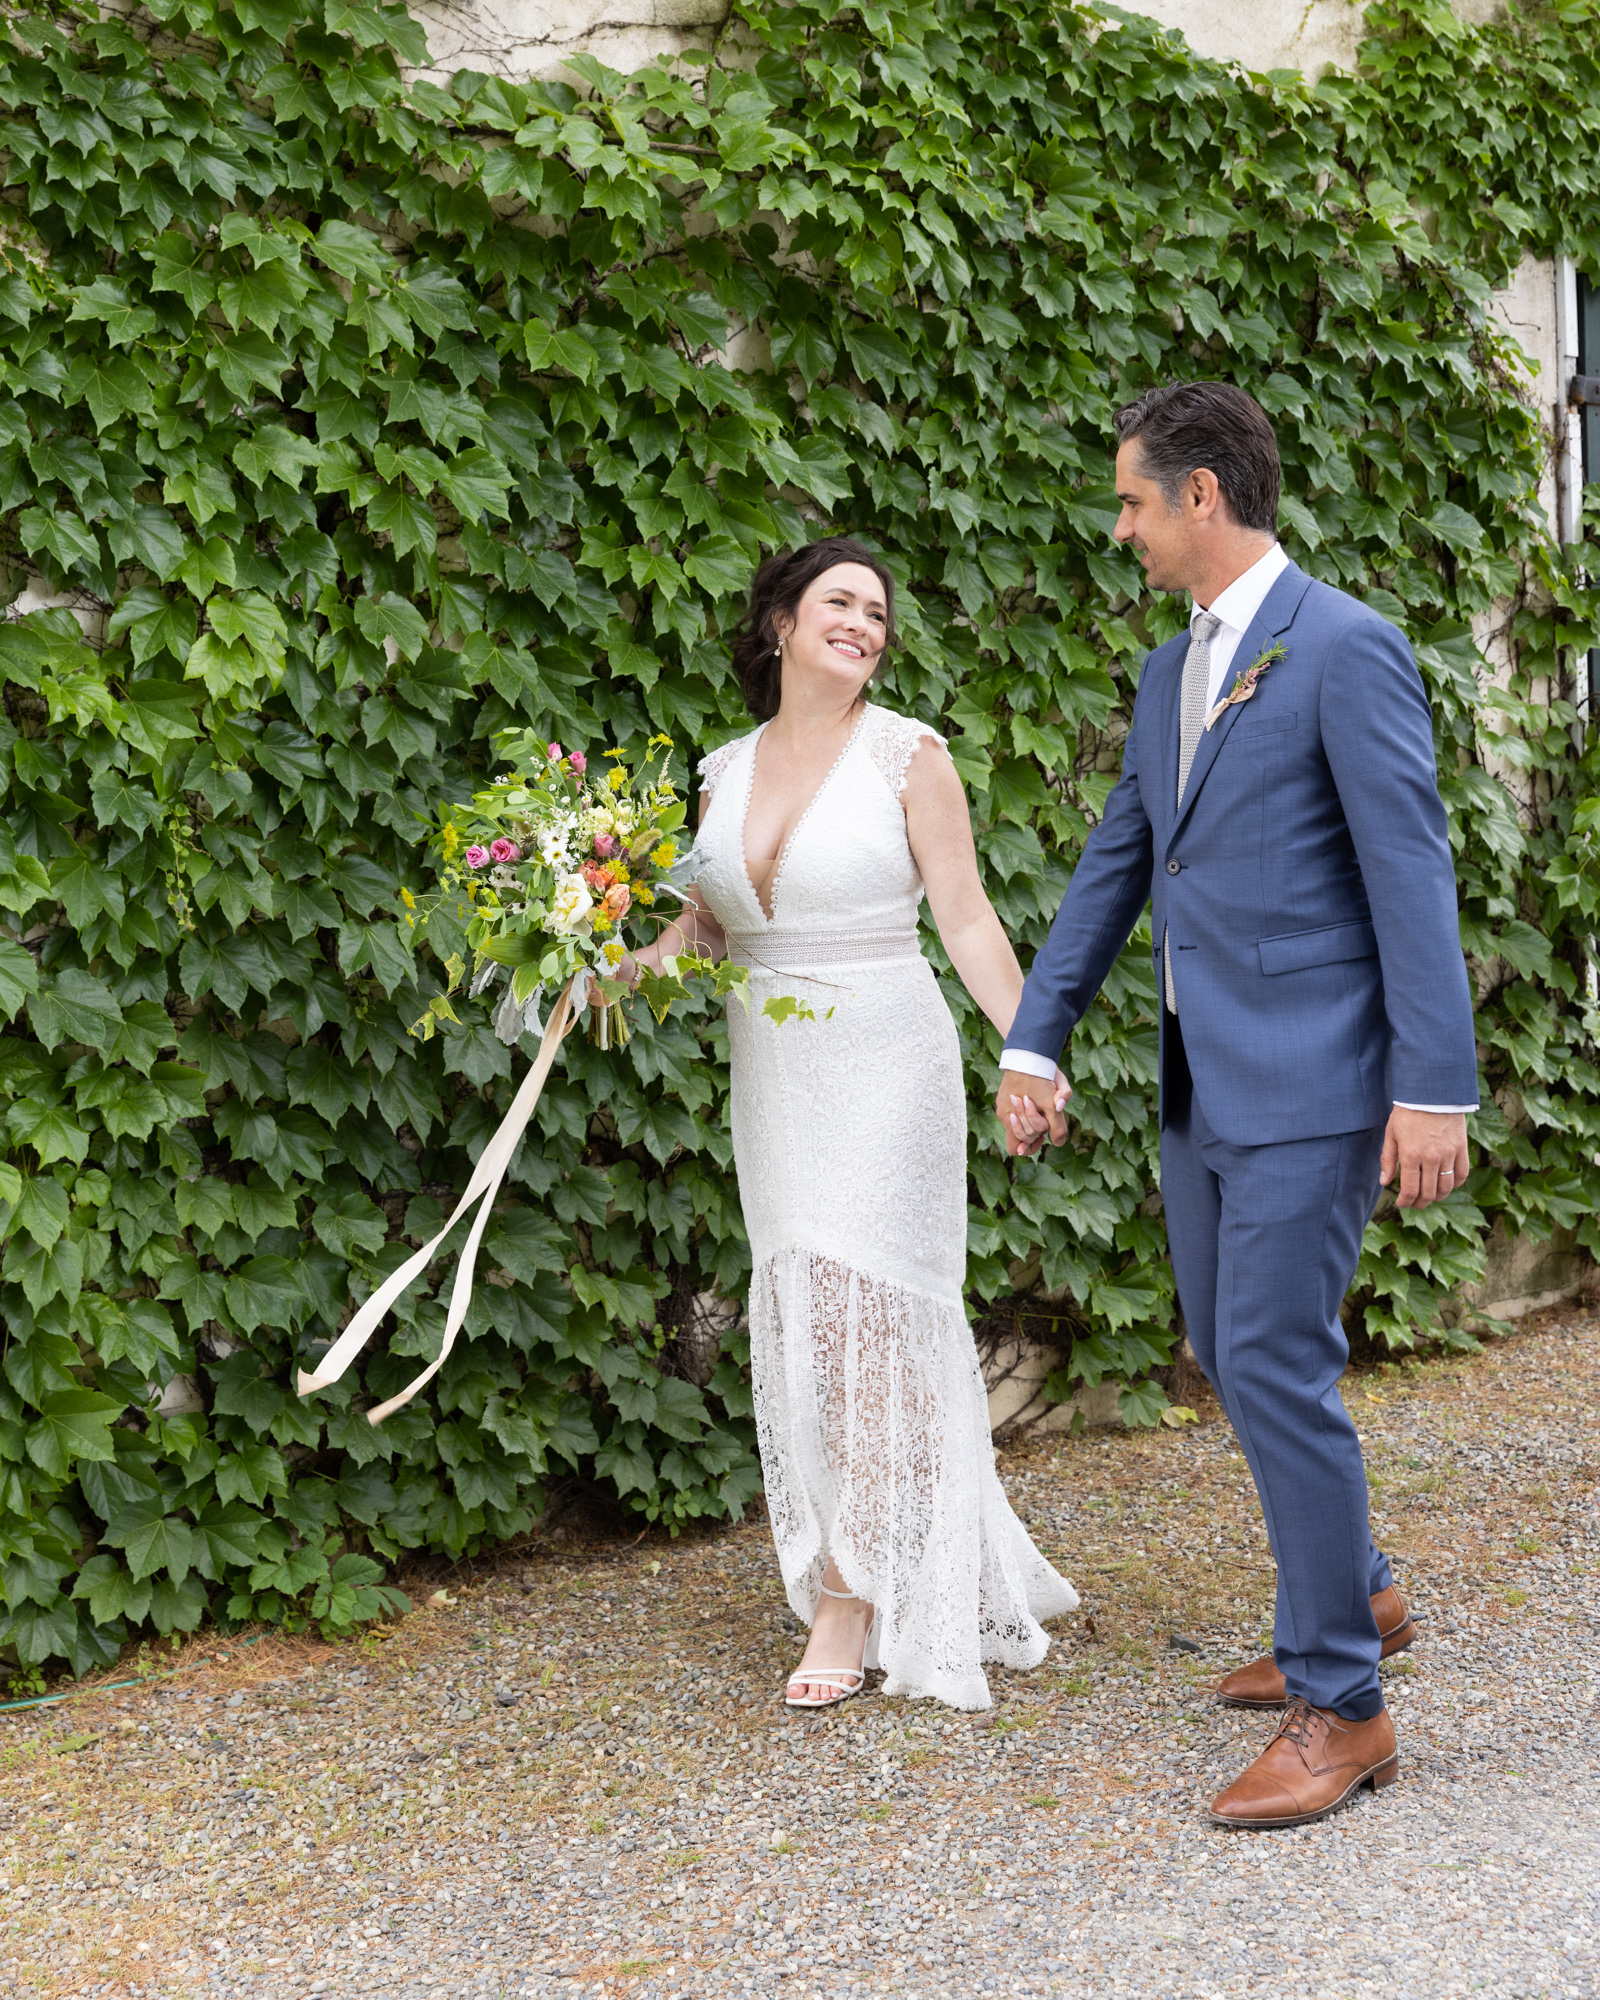 Elegant bride and groom walk holding hands near ivy covered wall at Bridgeton House on the Delaware in Bucks County, PA